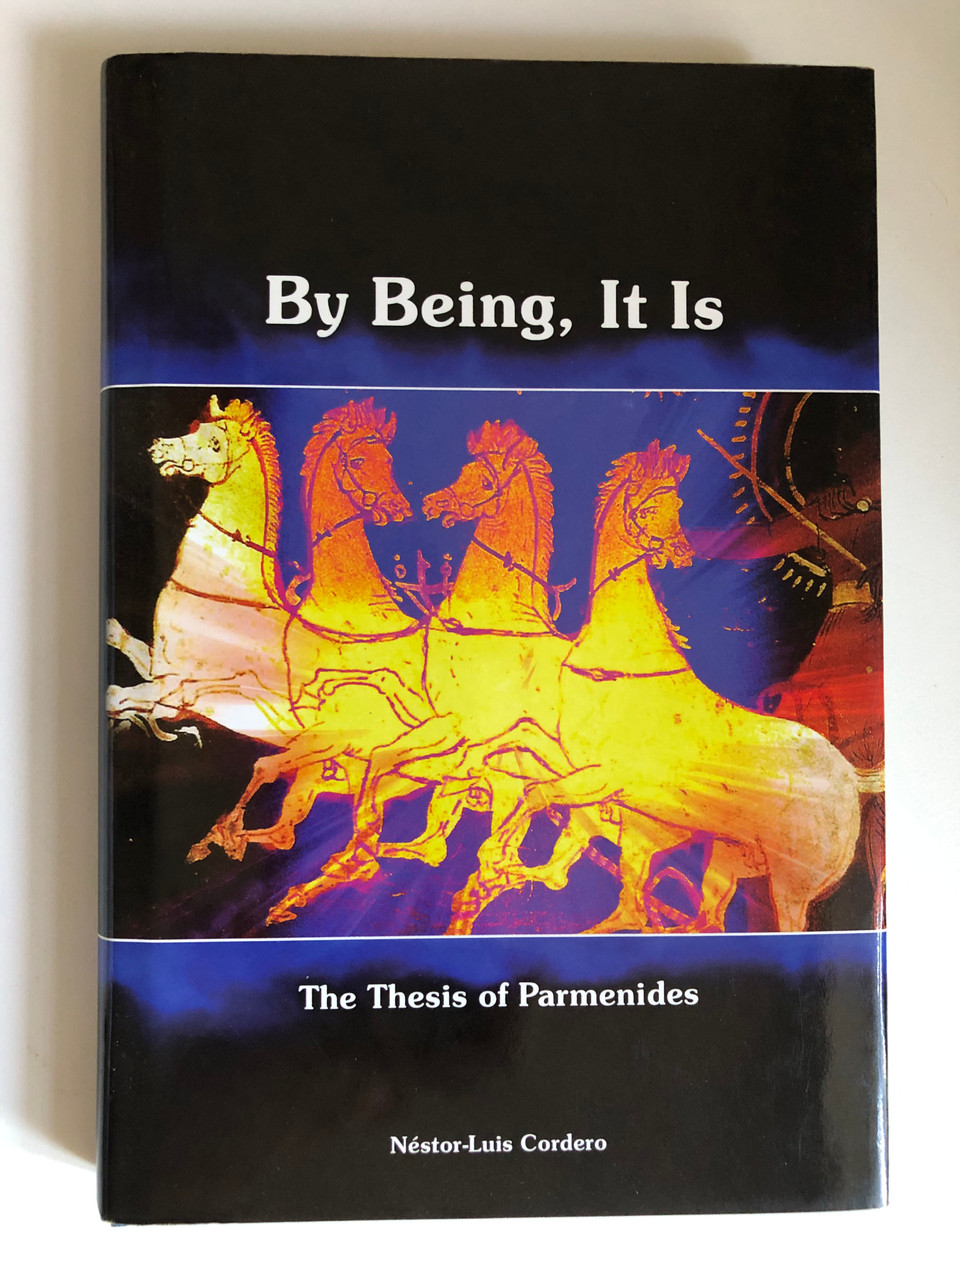 By_Being_It_Is_The_Thesis_of_Parmenides_by_Nestor-Luis_Cordero_In_By_Being_It_is_Nestor-Luis_Cordero_explores_the_richness_of_this_Parmenidean_thesis_Publisher_P___95072.1691243970.1280.1280.JPG (960×1280)